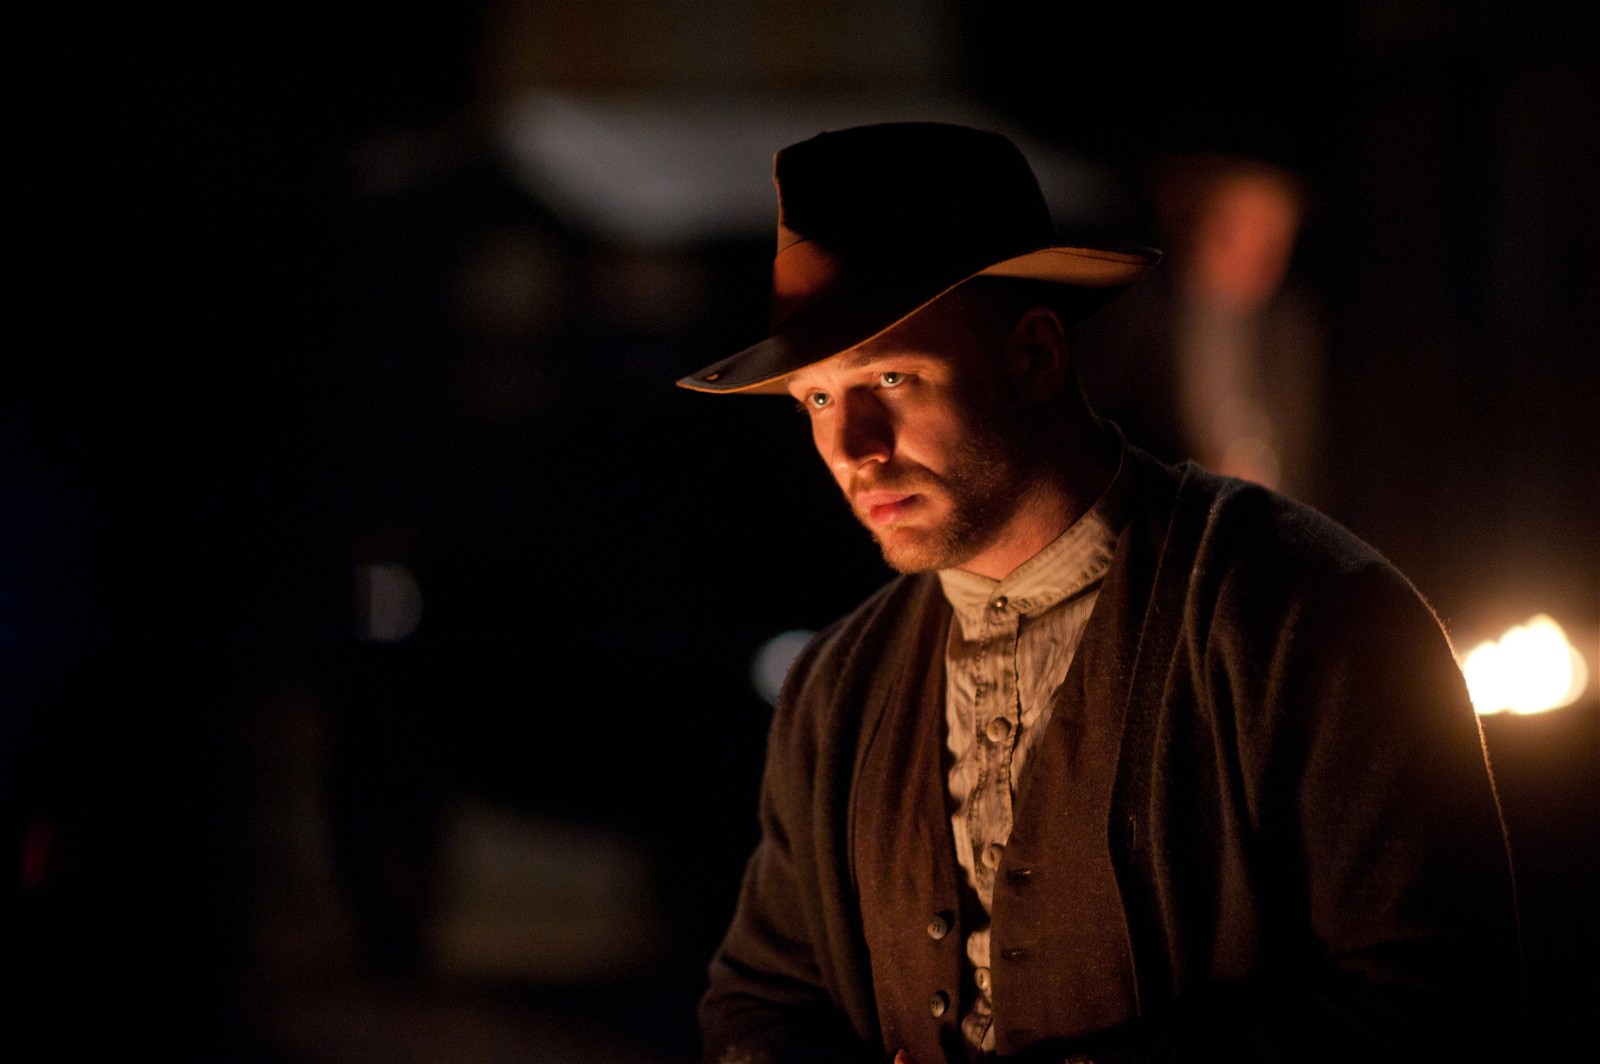 Tom Hardy in a still from Lawless (2012).